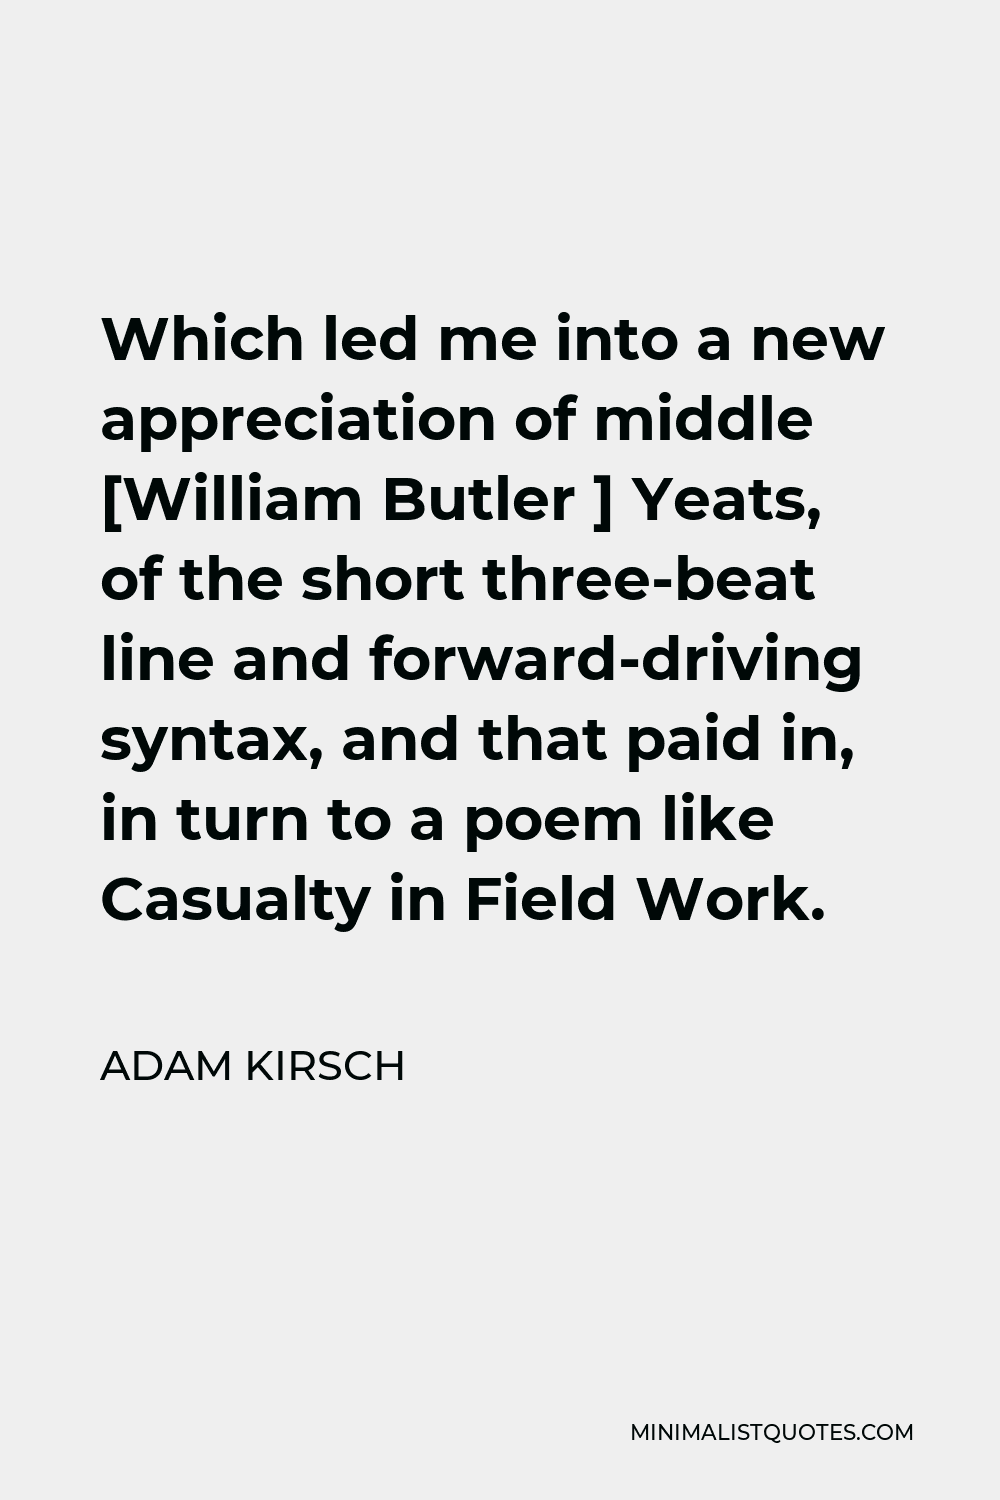 Adam Kirsch Quote - Which led me into a new appreciation of middle [William Butler ] Yeats, of the short three-beat line and forward-driving syntax, and that paid in, in turn to a poem like Casualty in Field Work.